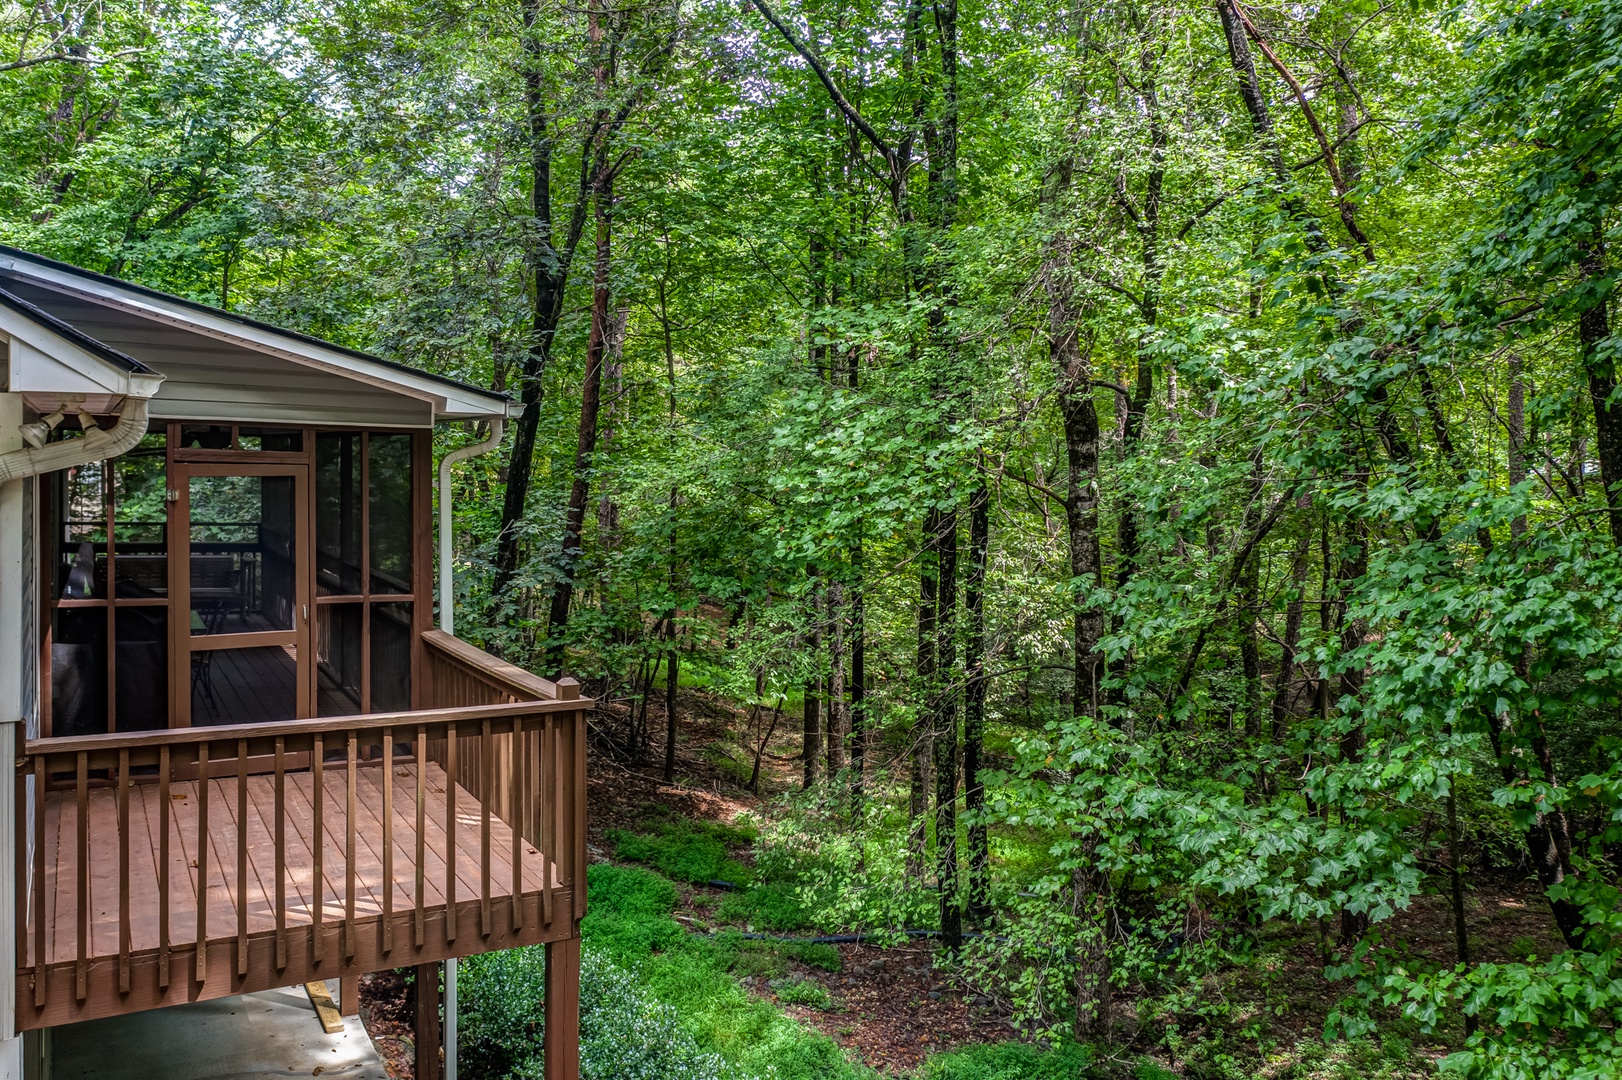 Take in the gorgeous treehouse views while you grill on the open back deck